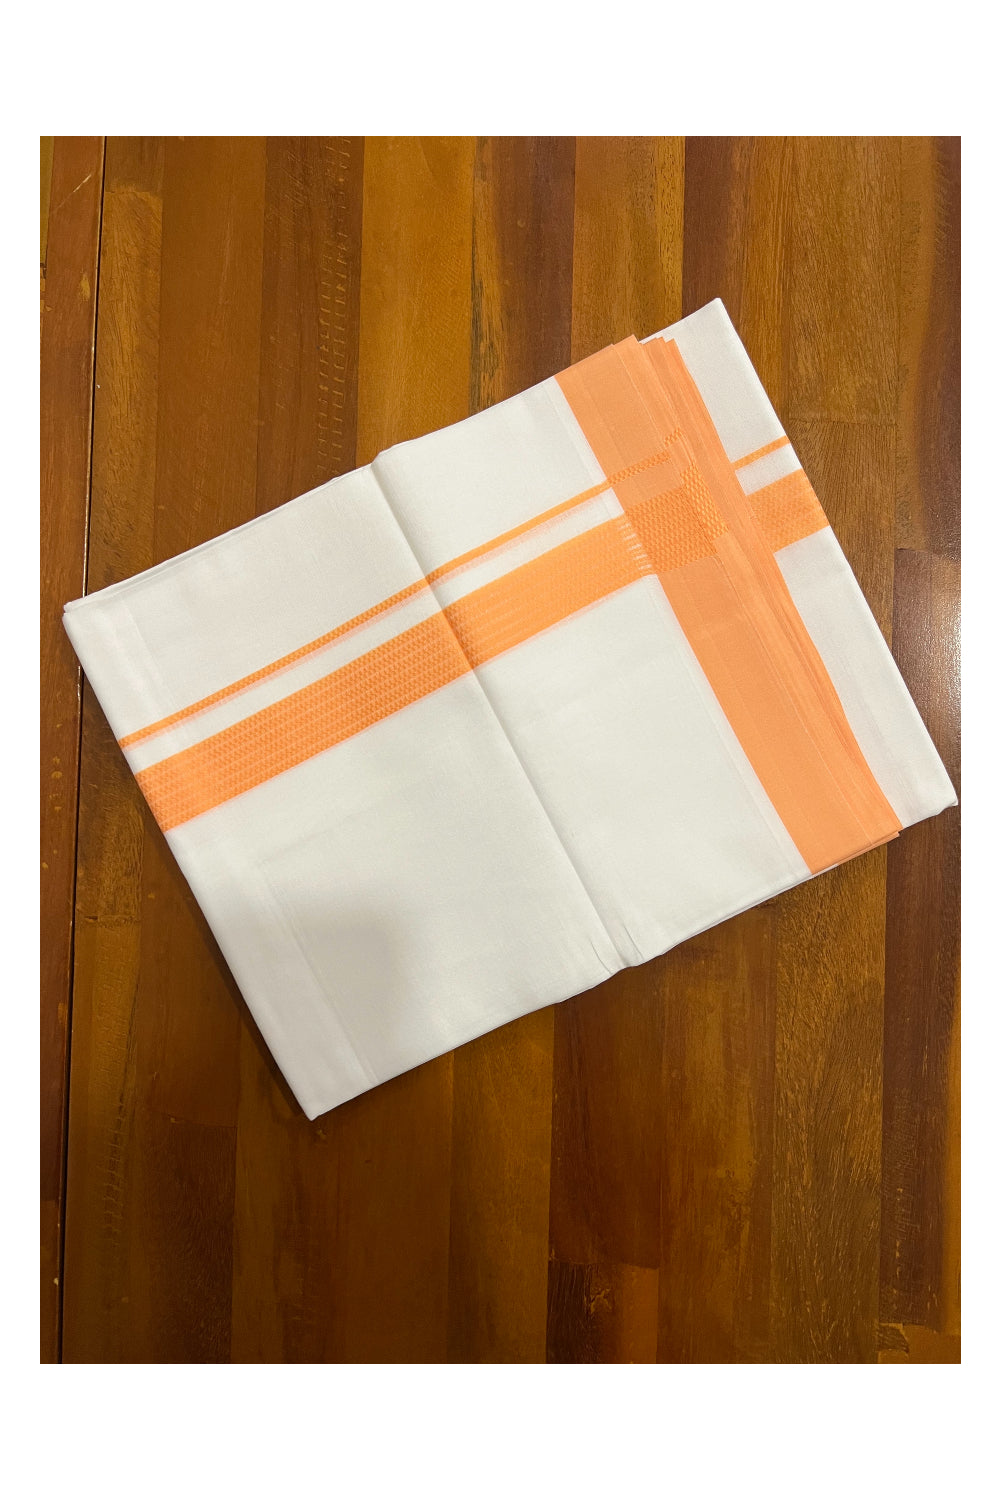 Pure White Cotton Double Mundu with Lines on Orange Border (South Indian Dhoti)